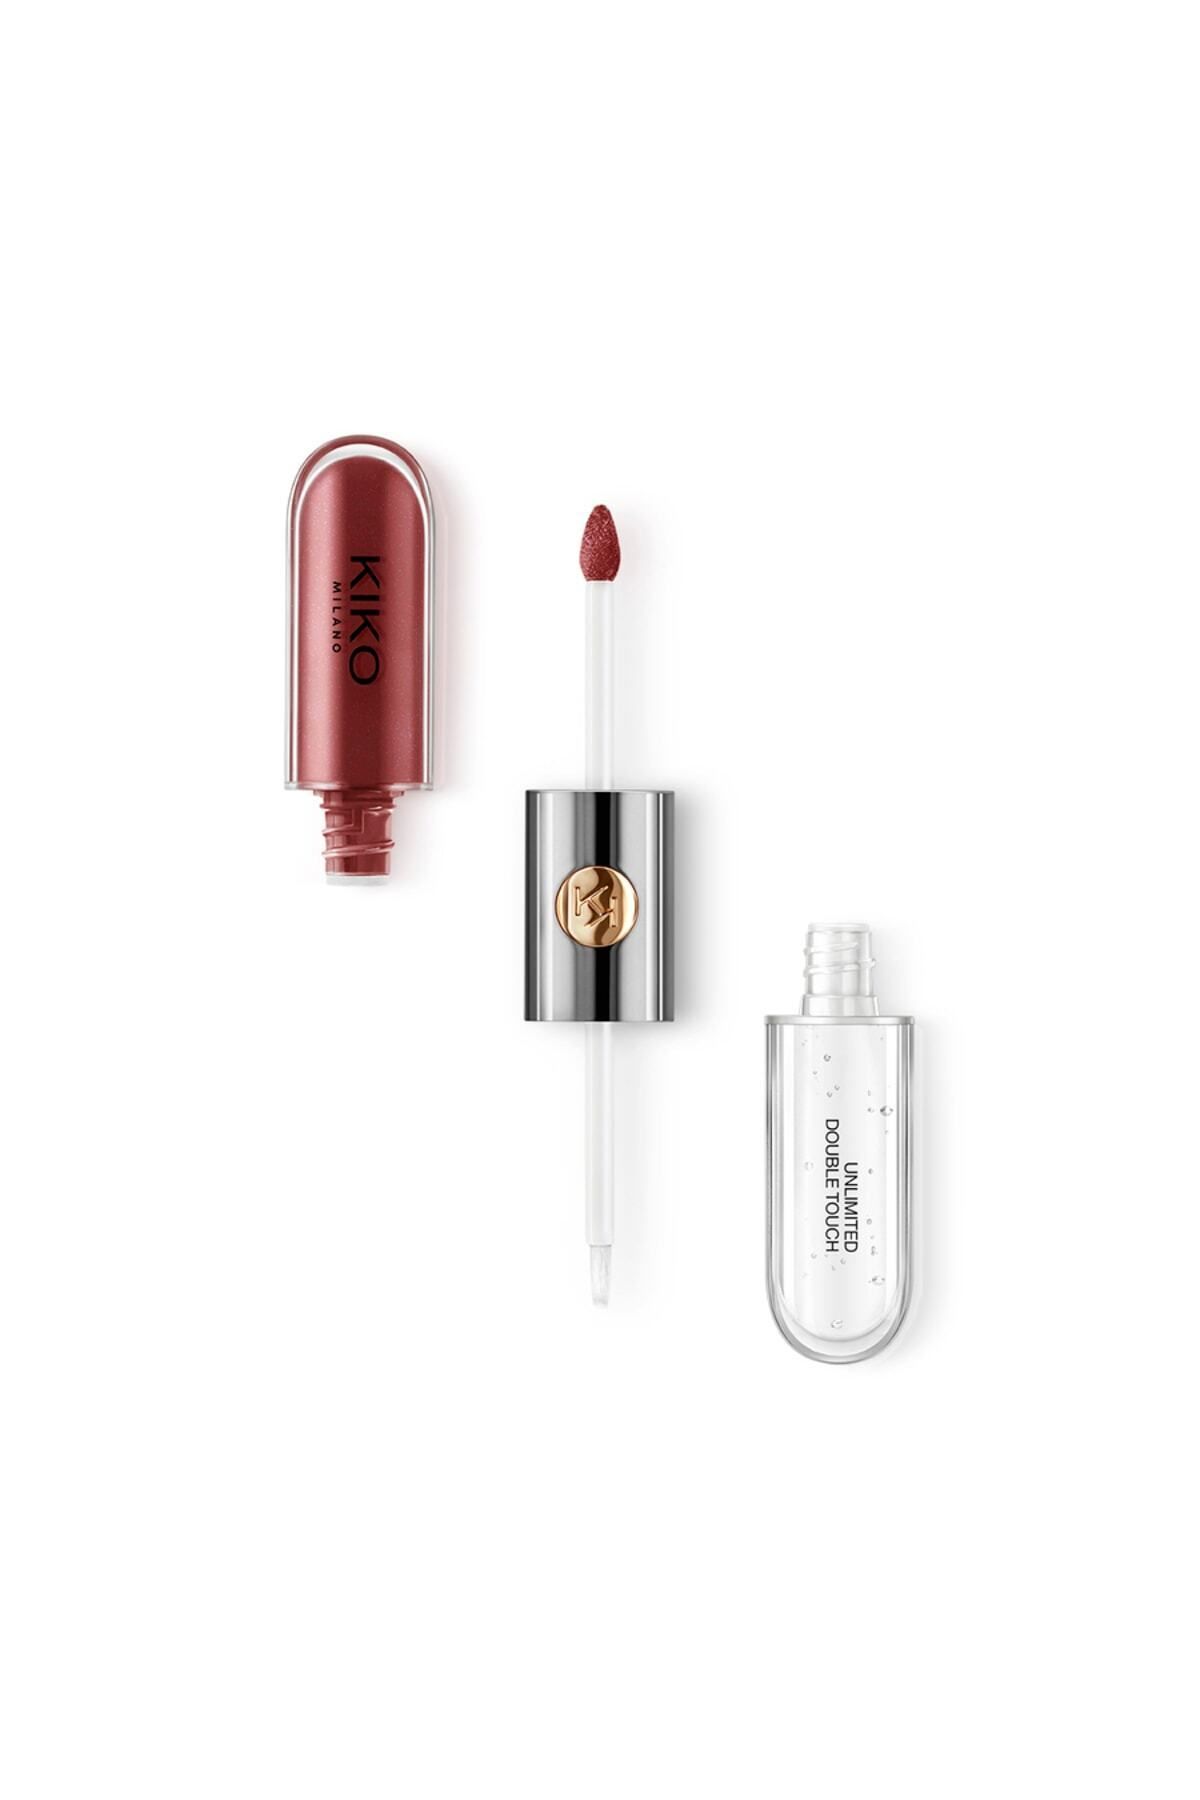 KIKO Likit Ruj - Unlimited Double Touch 105 Scarlet Red 6 ml